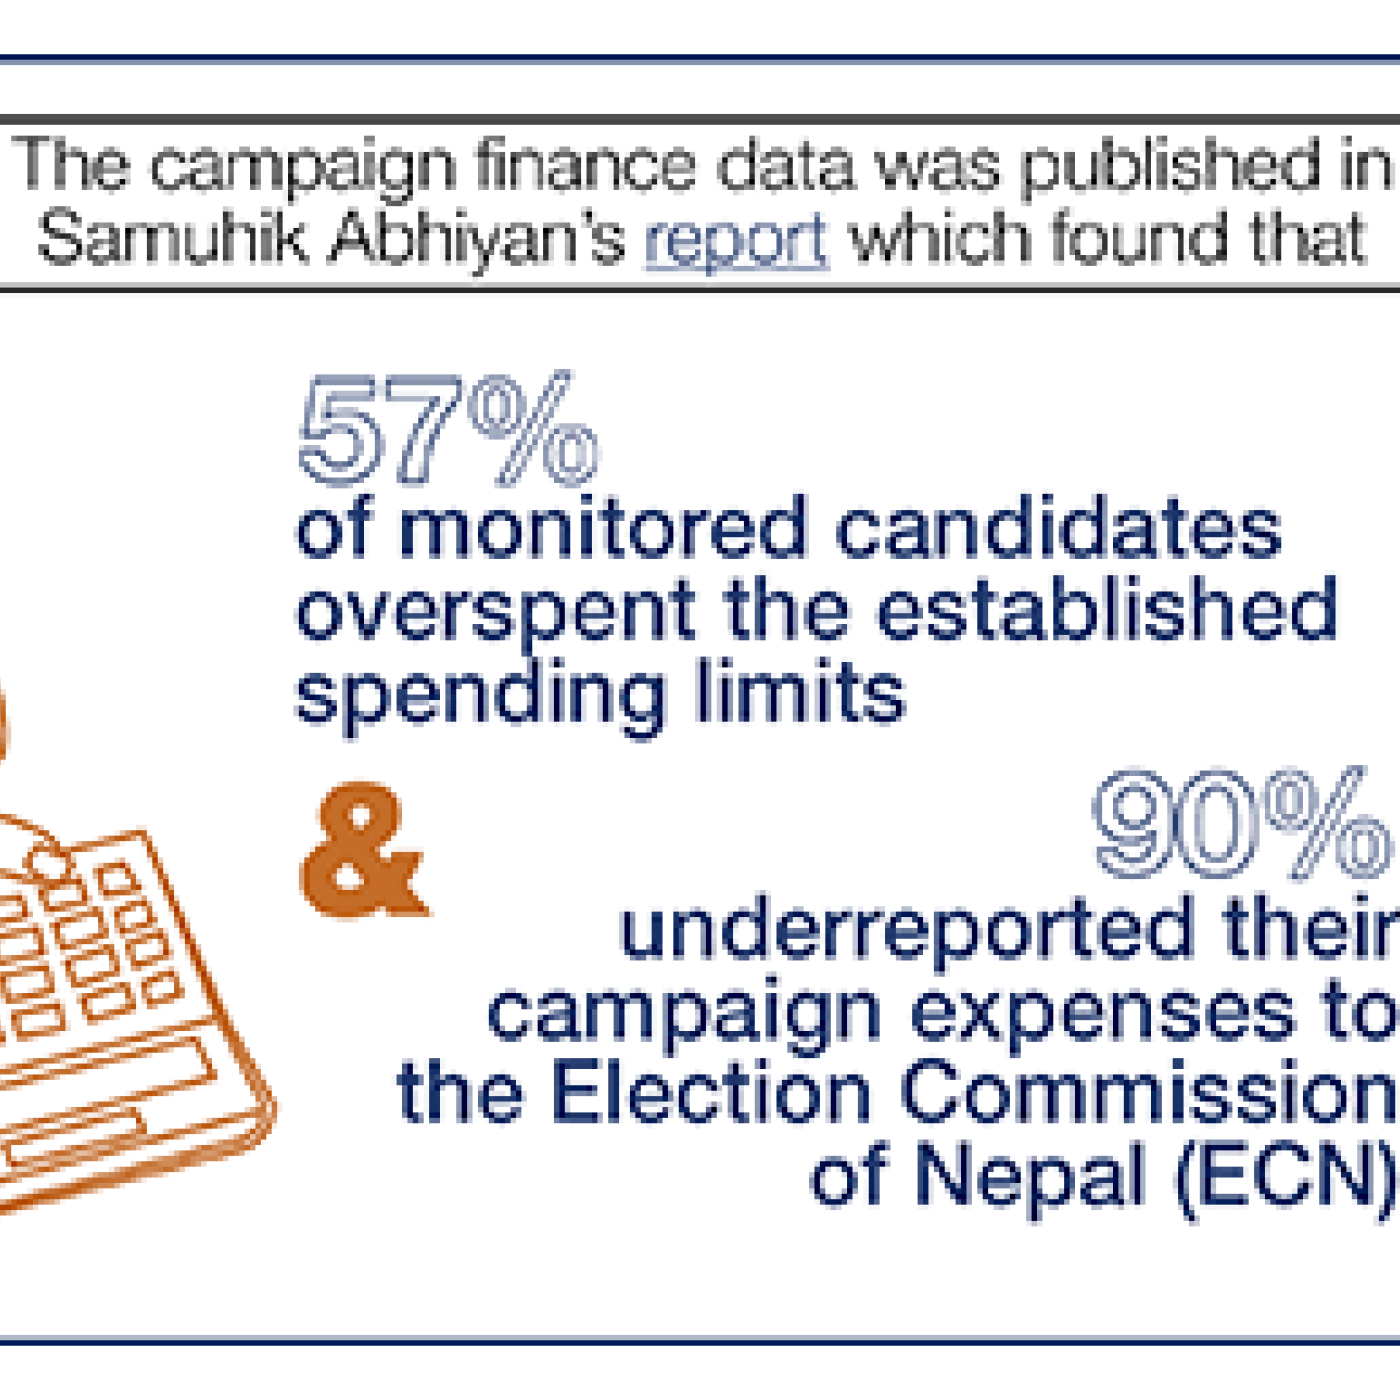 57% of monitored candidates overspent & 90% underreported their campaign expenses